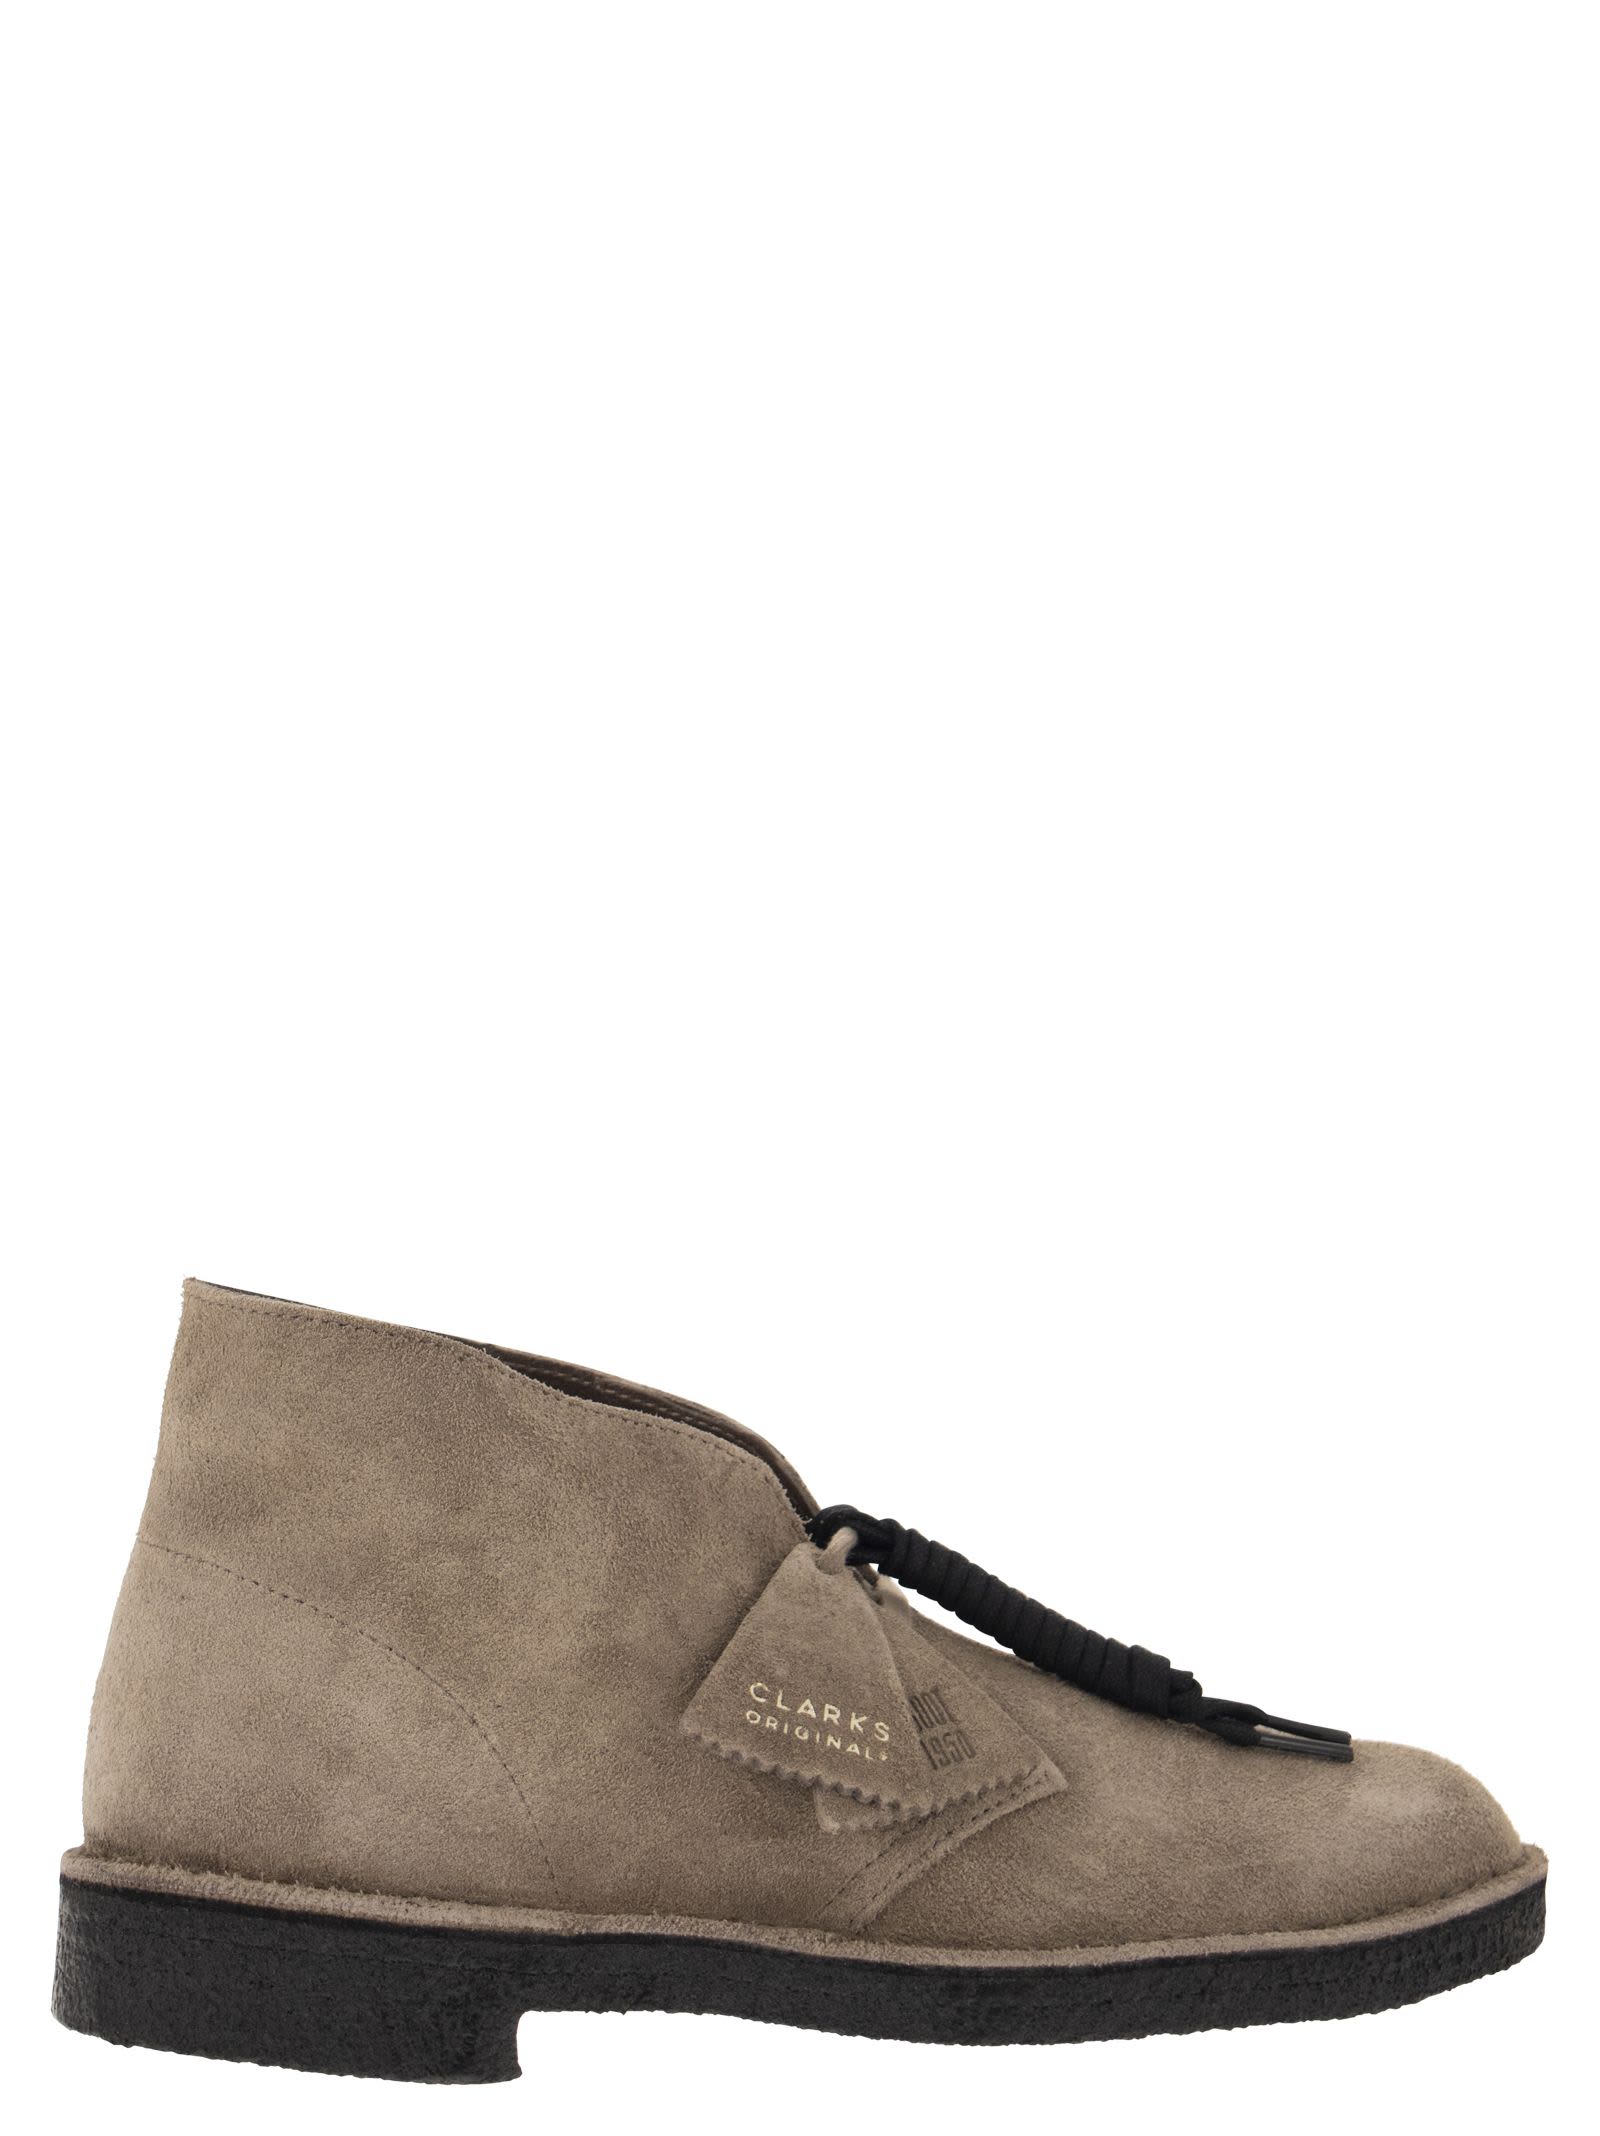 CLARKS DESERT BOOT - LACE-UP BOOT